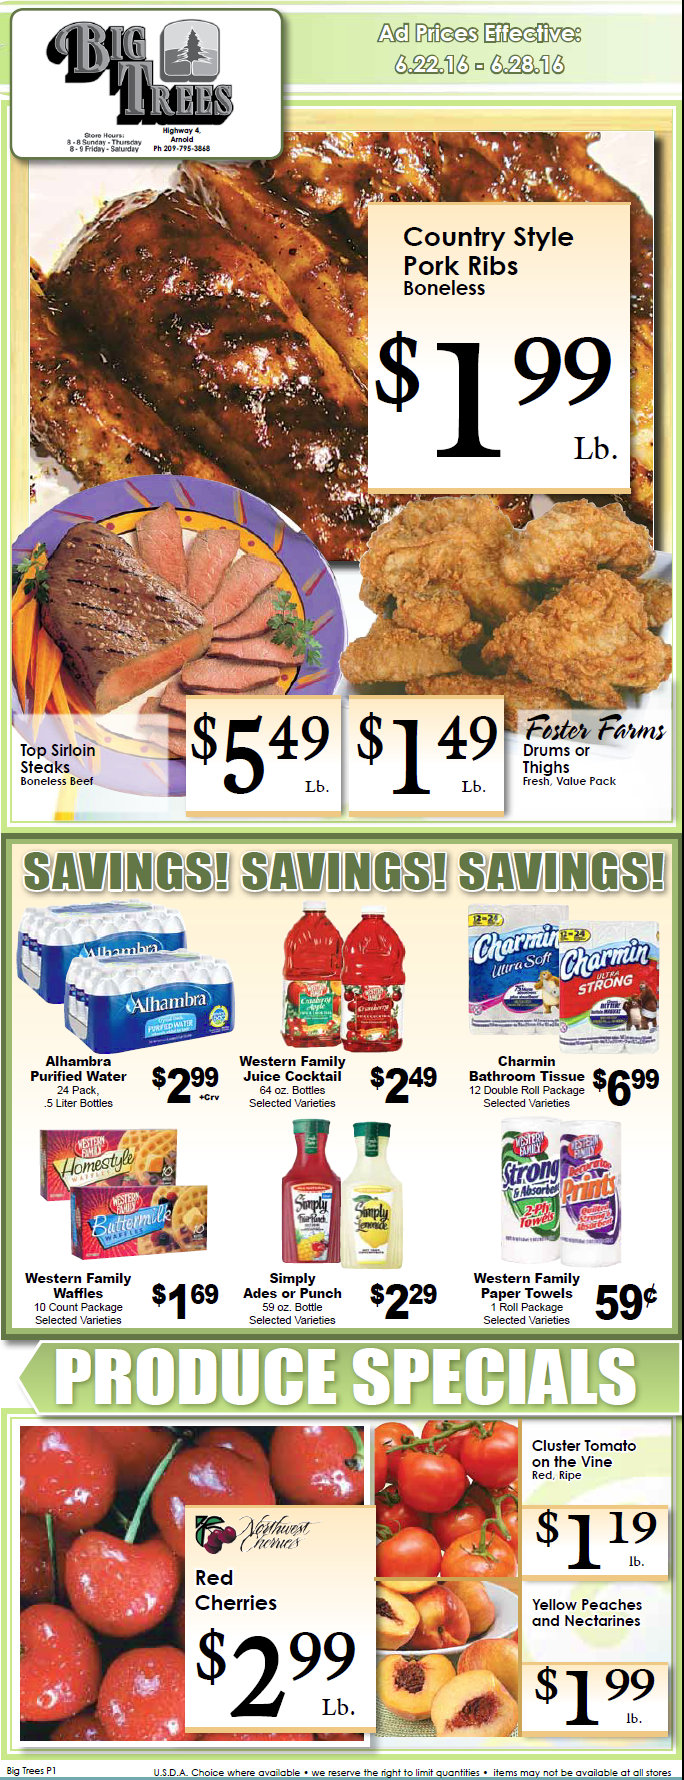 Big Trees Market Weekly Ad Through June 28th